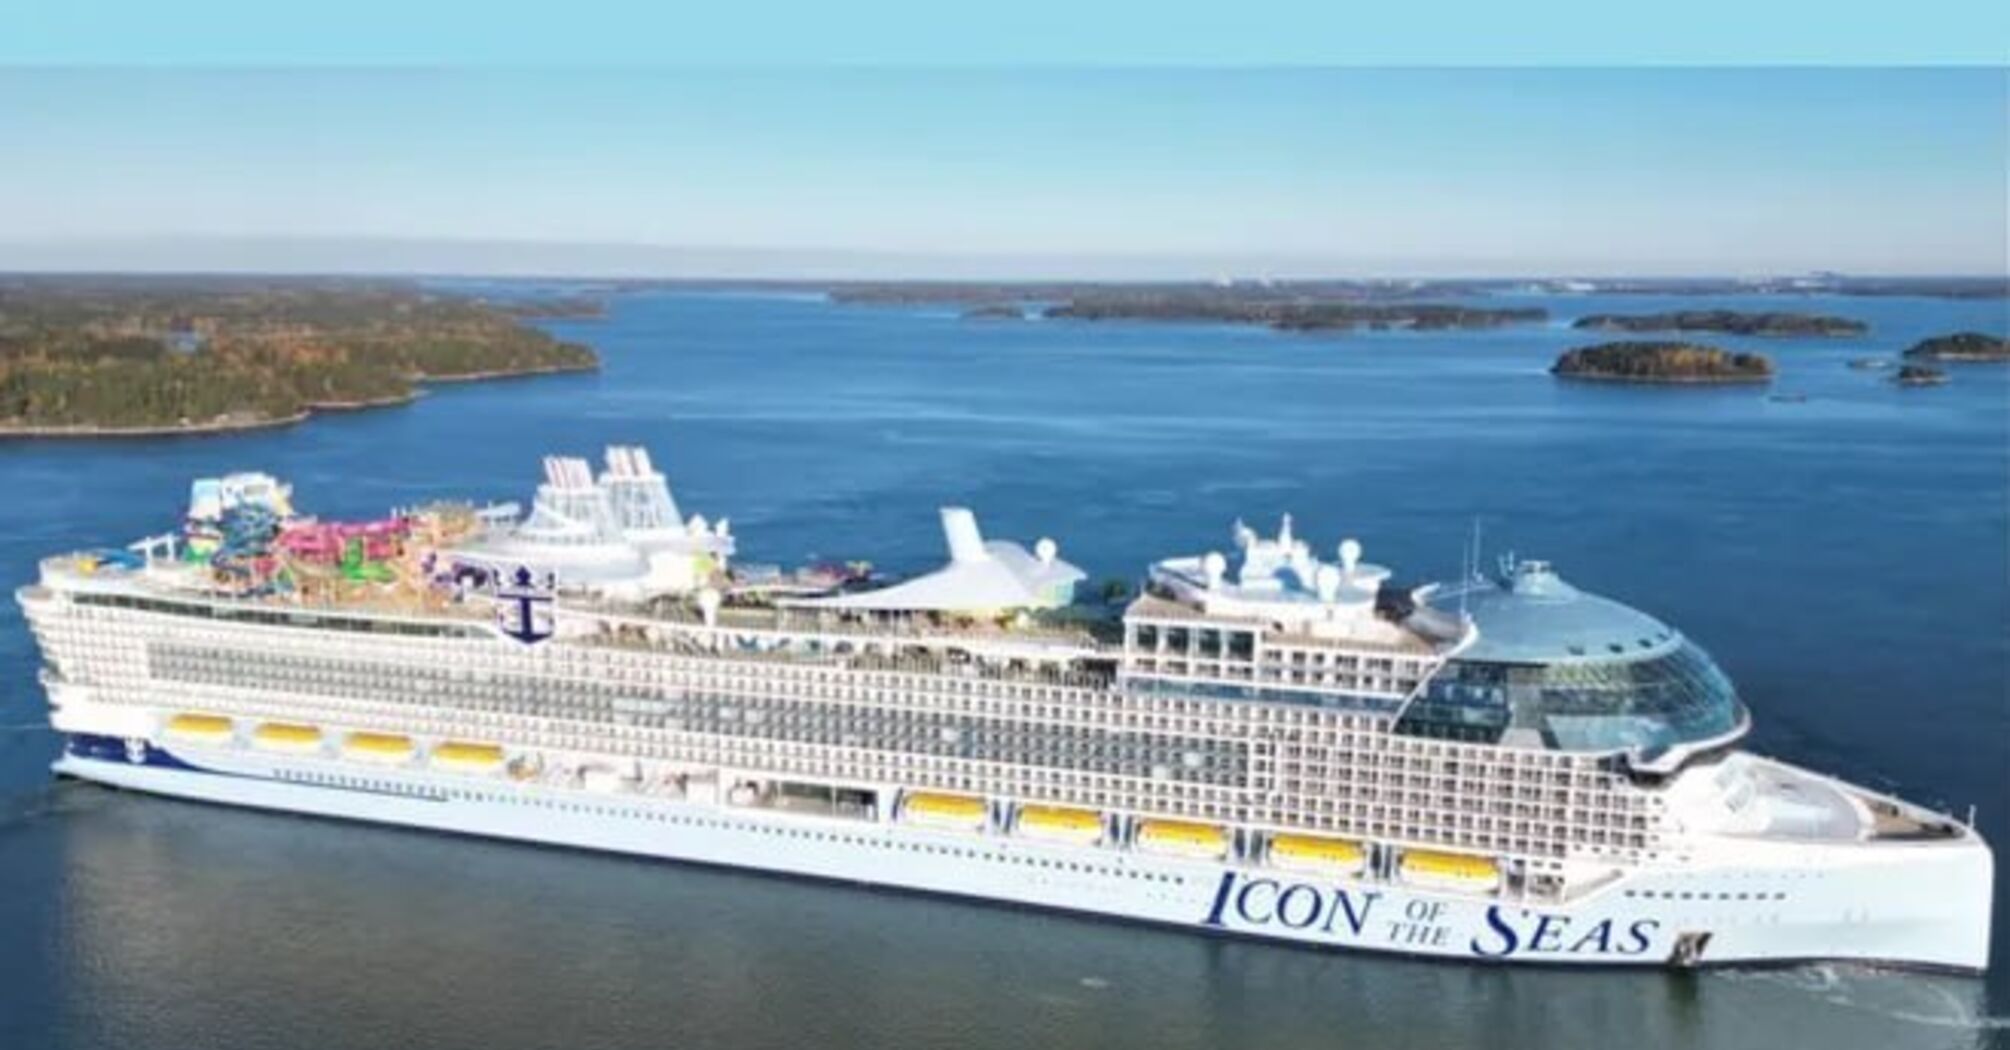 The world's largest cruise ship, Icon of the Seas